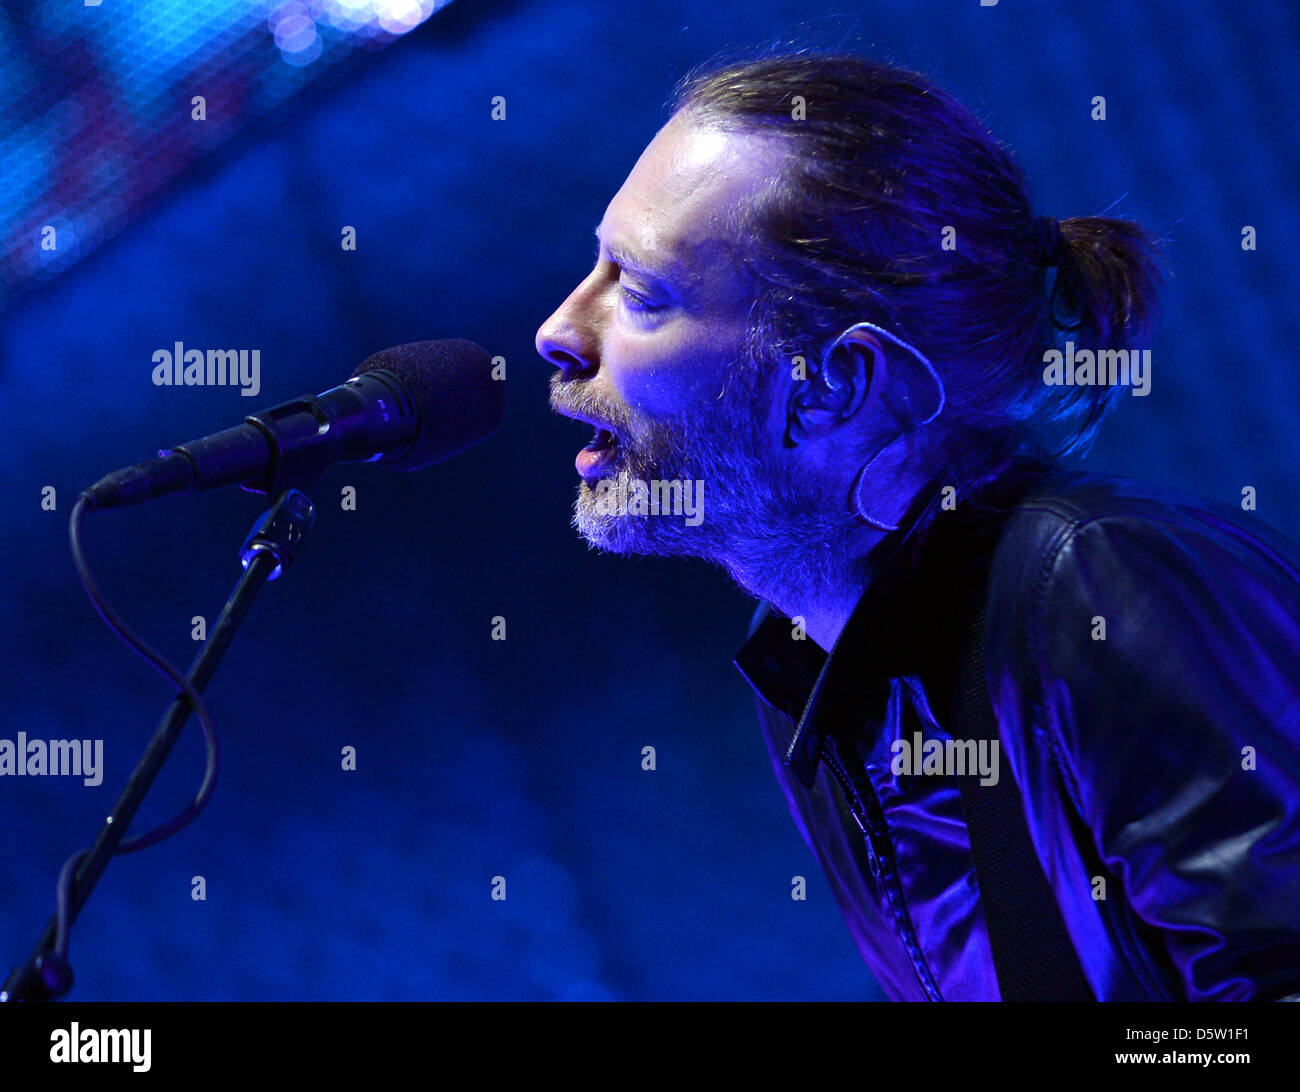 Singer Thom Yorke and the English band Radiohead perform open air at Wuhlheide stage in Berlin, Germany, 29 September 2012. Photo: BRITTA PEDERSEN Stock Photo